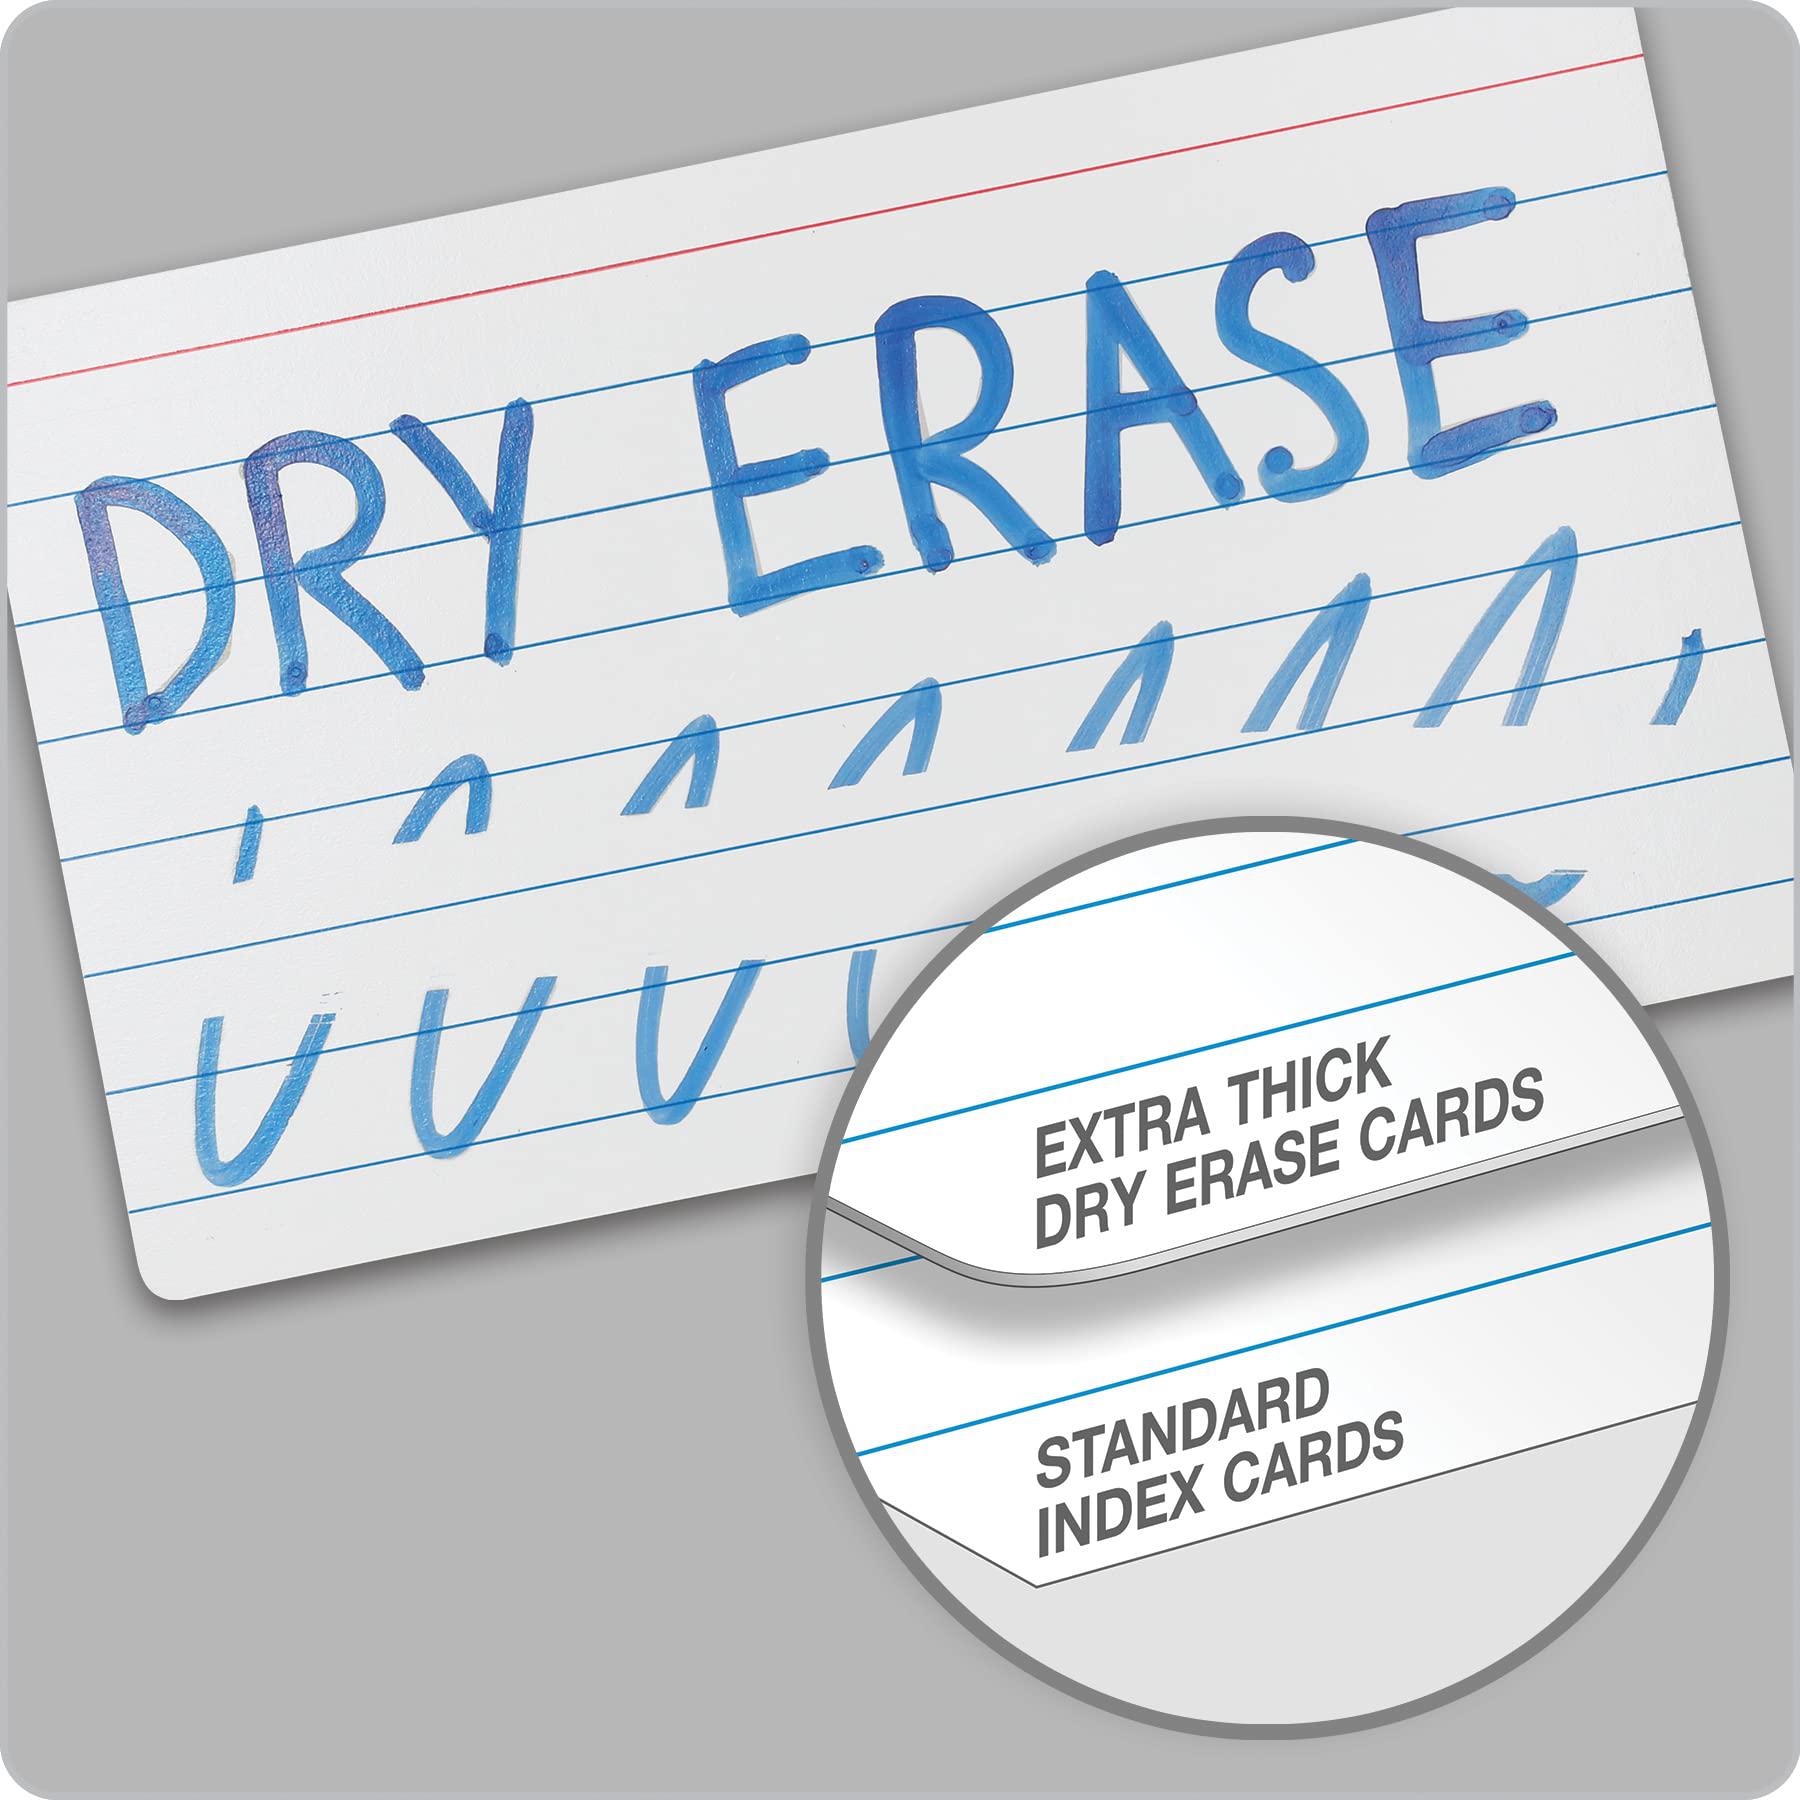 oxford dry erase index cards, 3x5, blank & ruled multipack, reusable flash cards, double sided dry & wet erase cards for gami